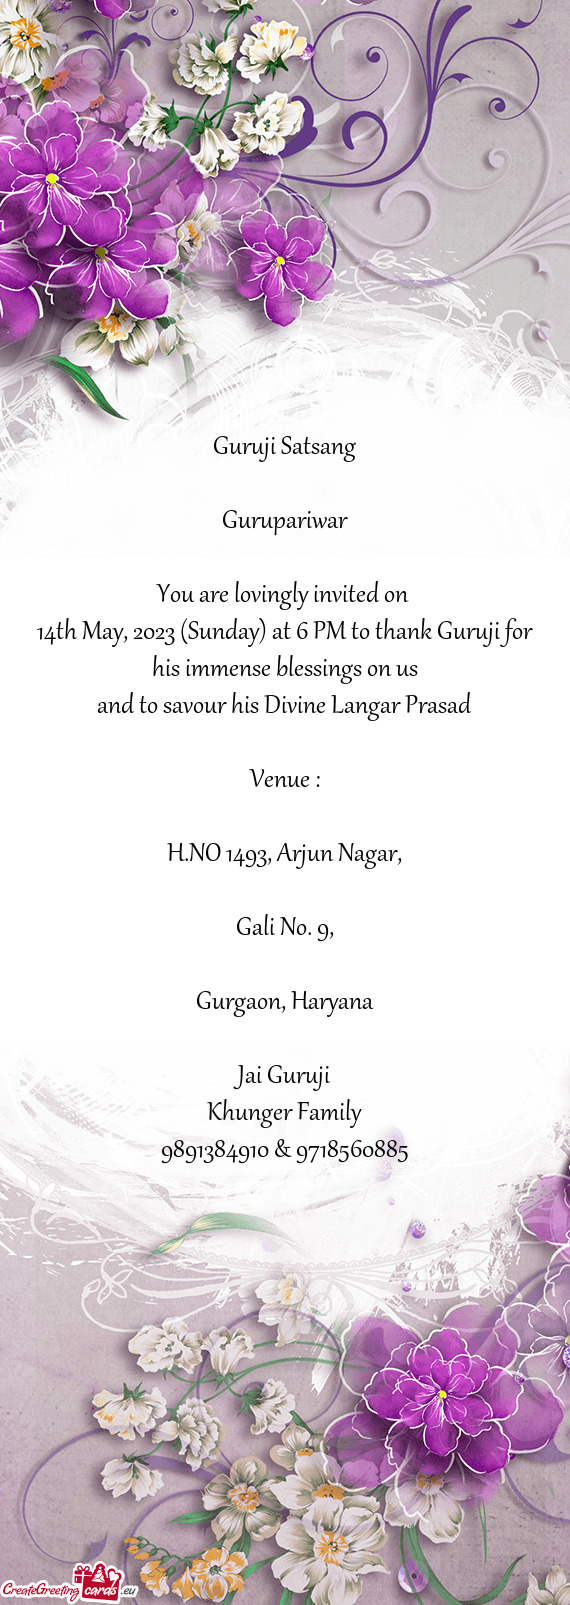 14th May, 2023 (Sunday) at 6 PM to thank Guruji for his immense blessings on us